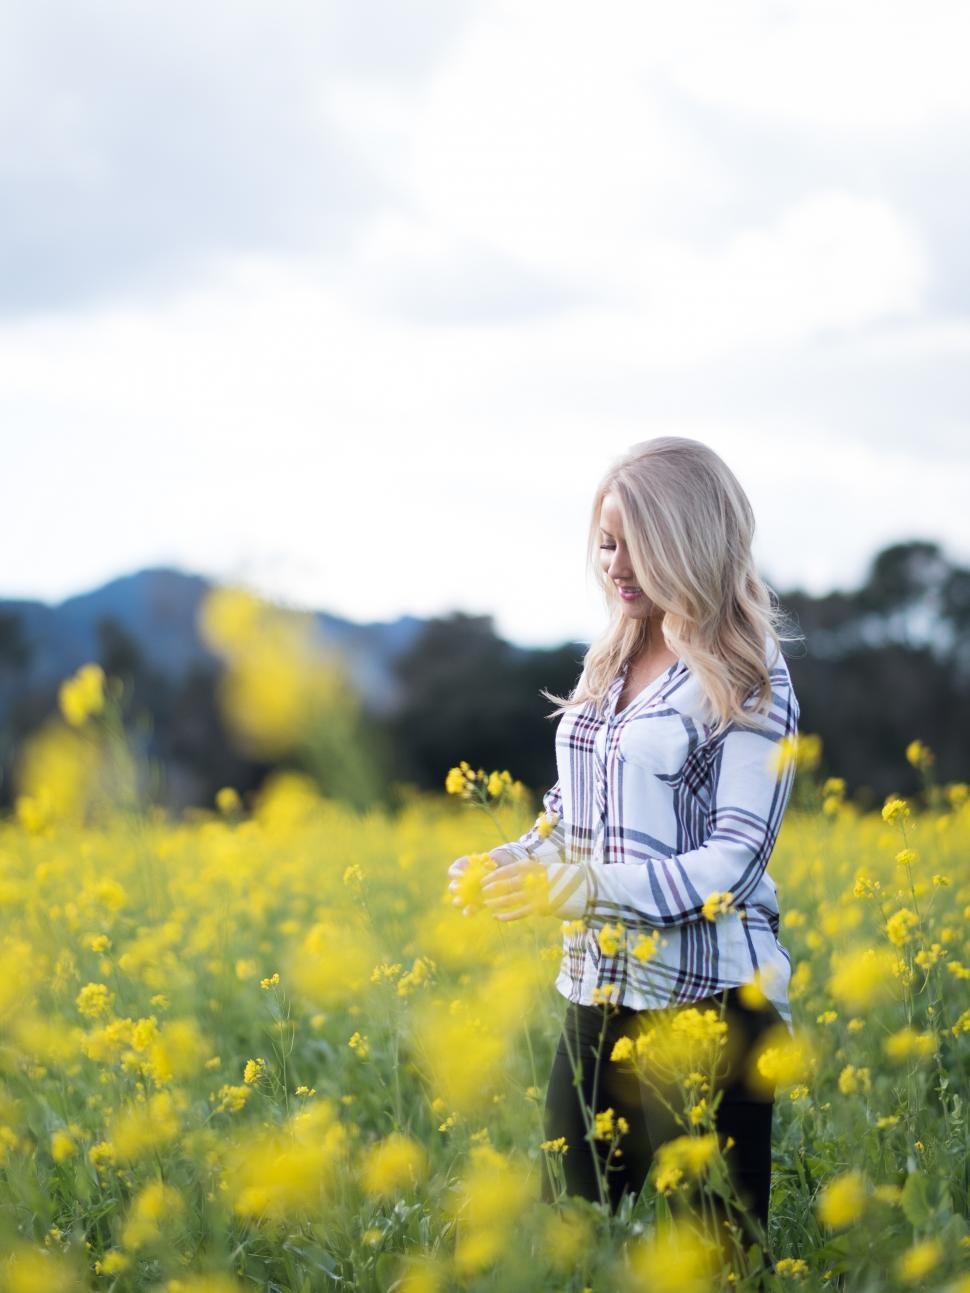 Free Image of Smiling woman in flower field 